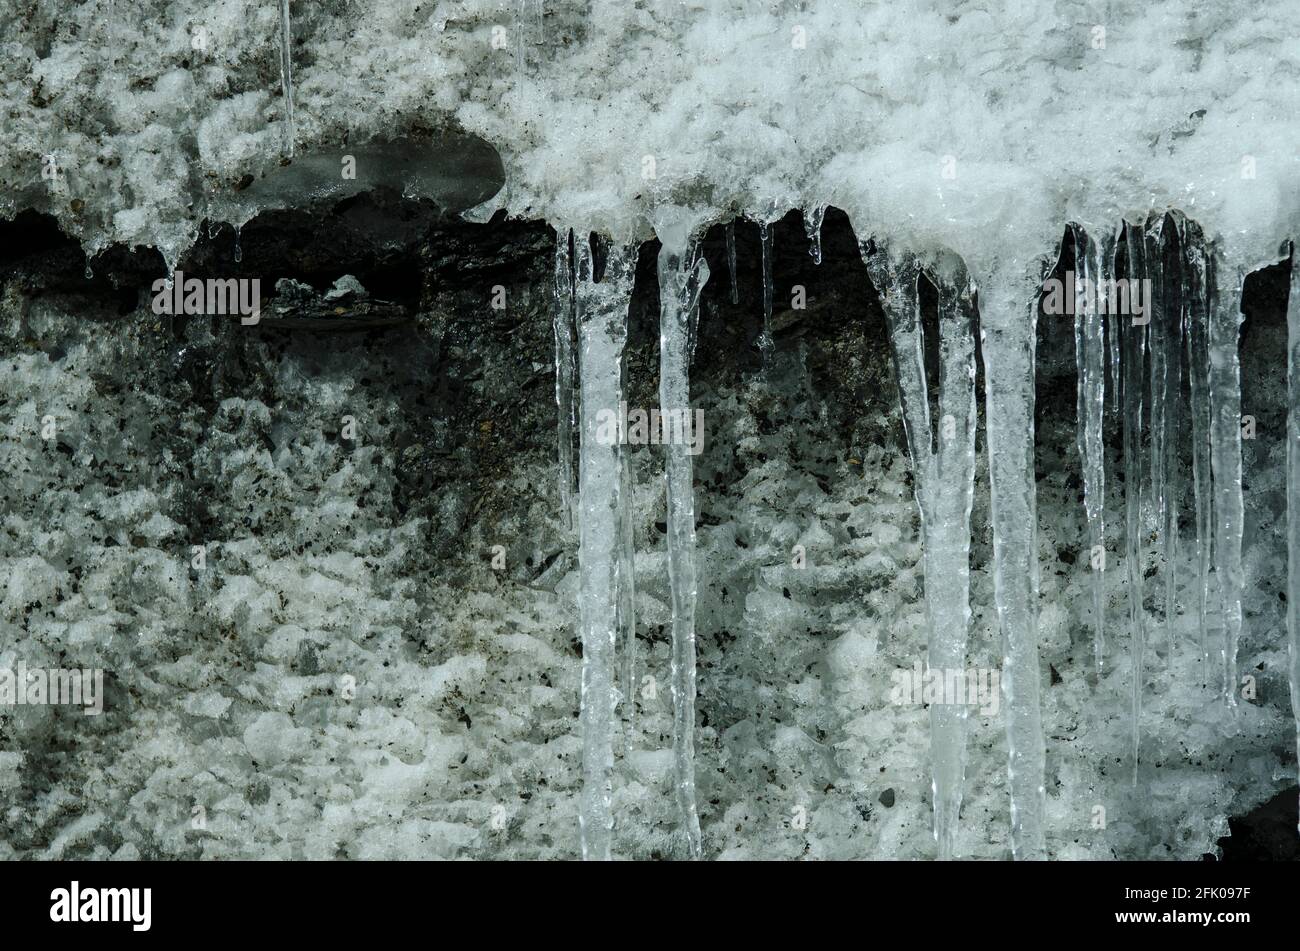 Icicles are formed where melted snow and ice drips off the edge of the Xinjiang Tianshan No 1 Glacier, where ice and snow have been compacted over many years onto the rocky slopes of the Tianshan mountains in Eastern Xinjiang, China, PRC. © Time-Snaps Stock Photo